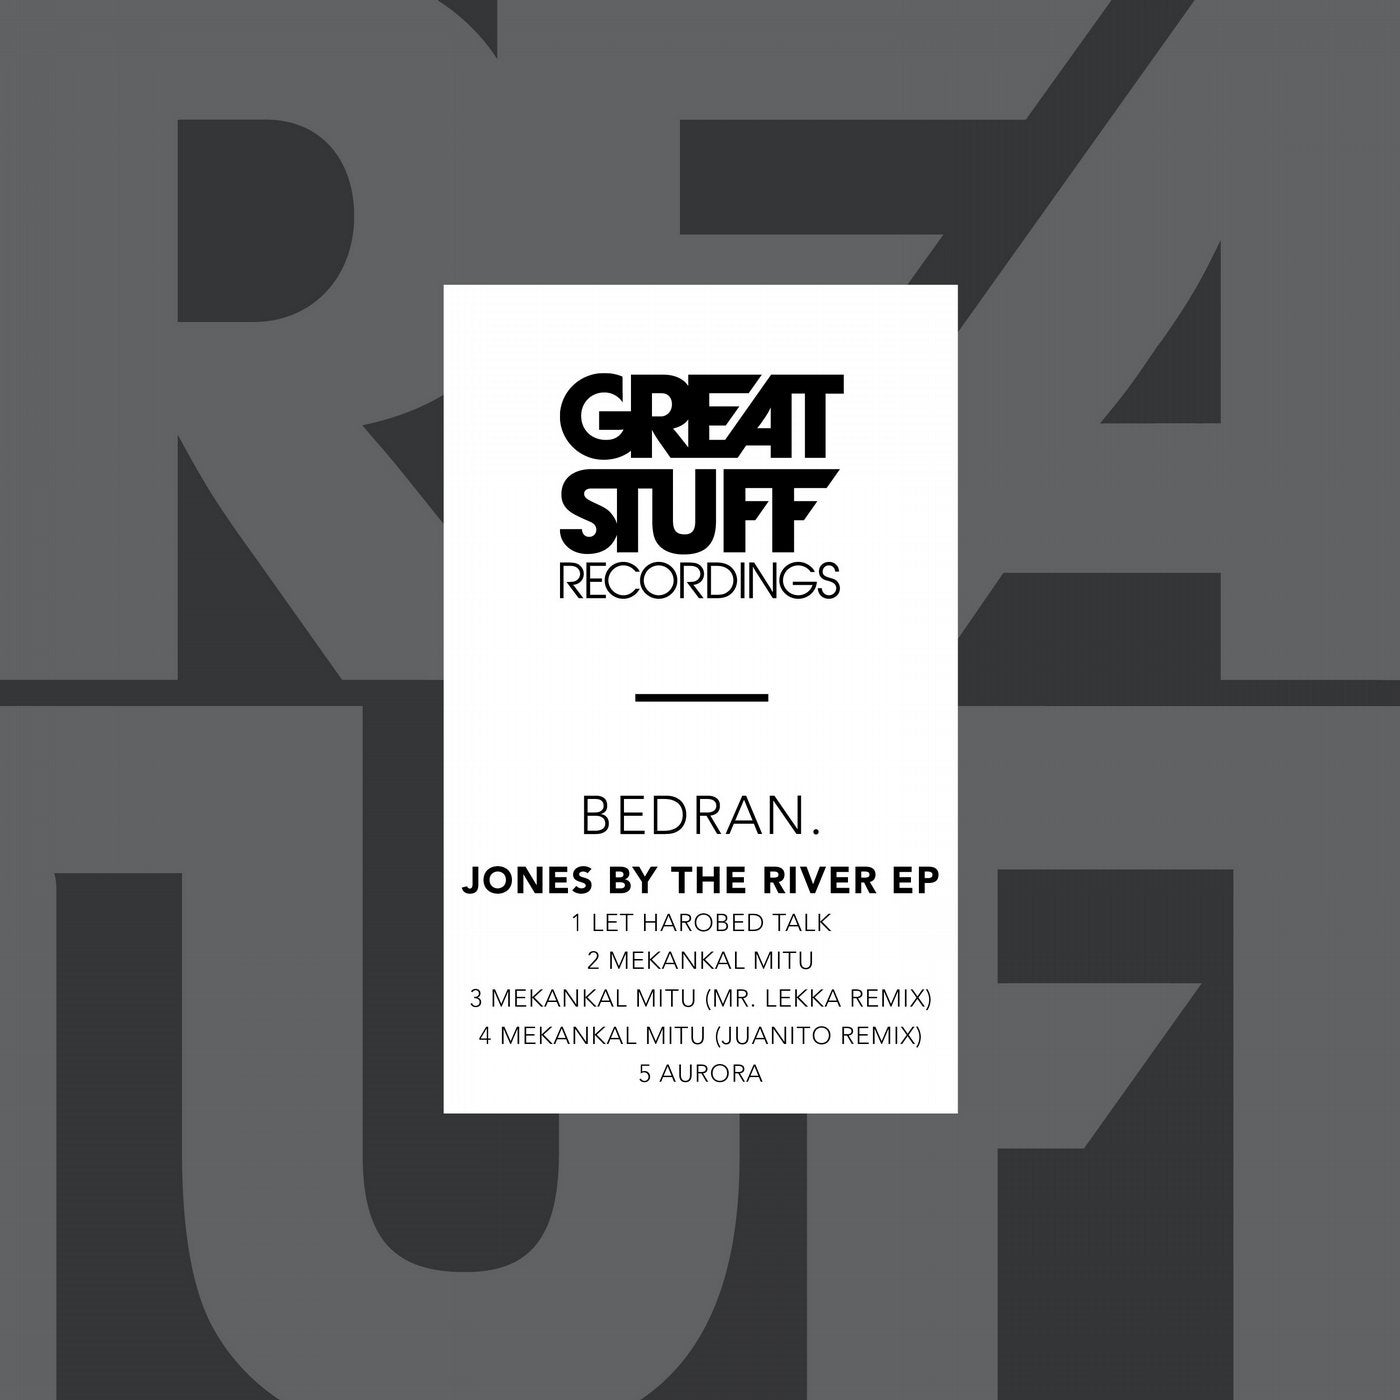 Jones by the River EP